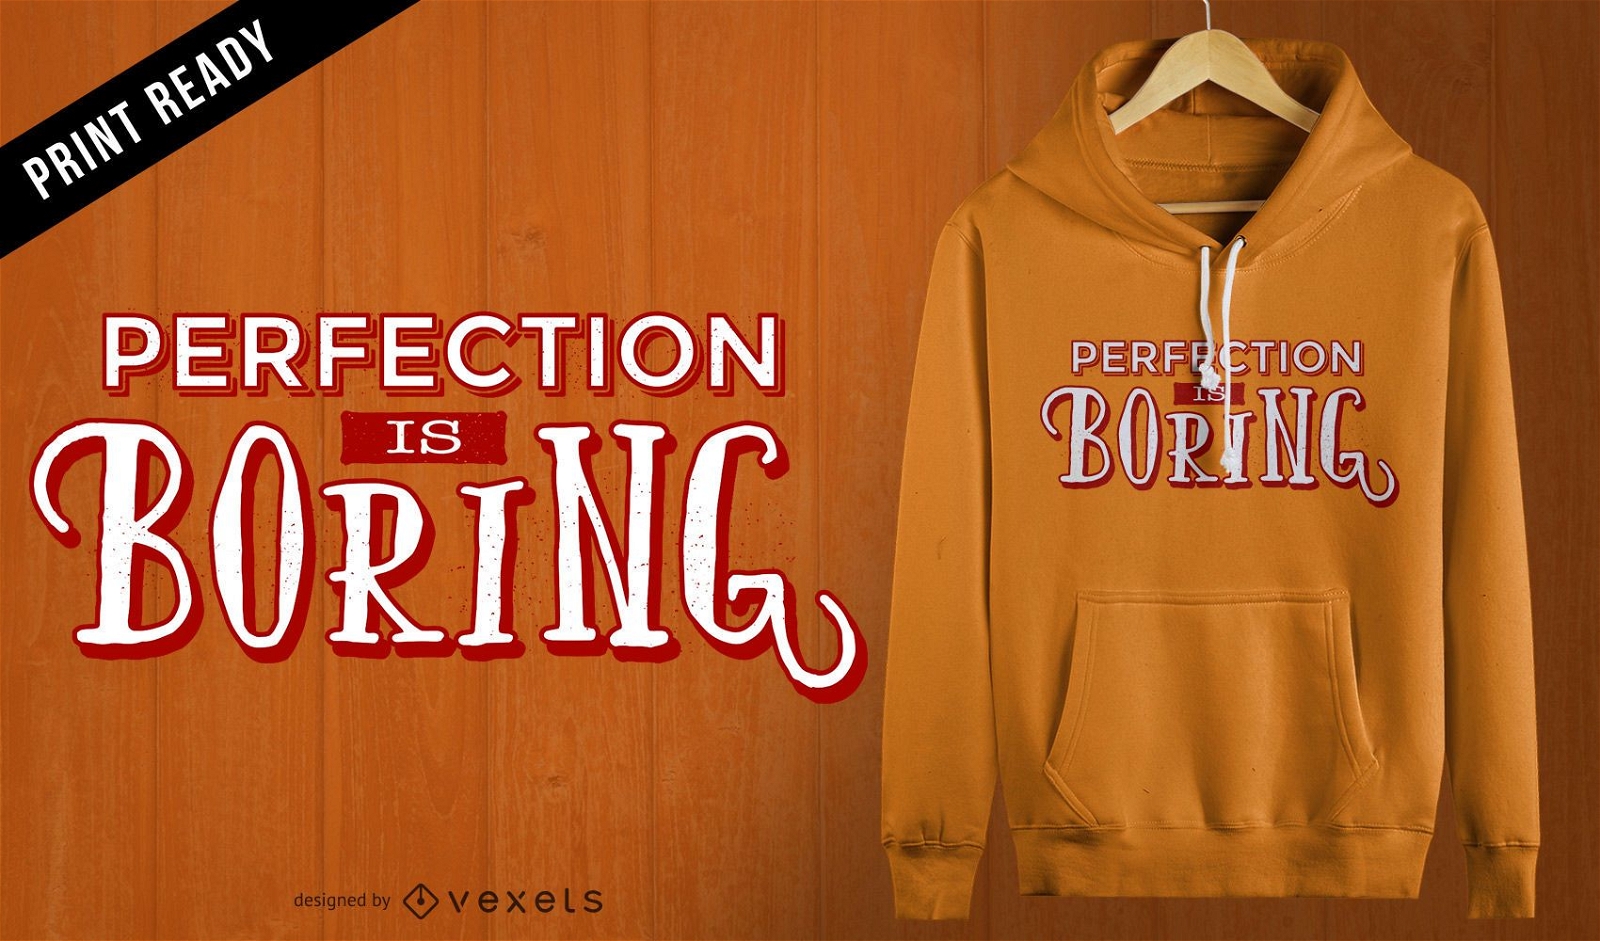 Perfection is boring t-shirt design